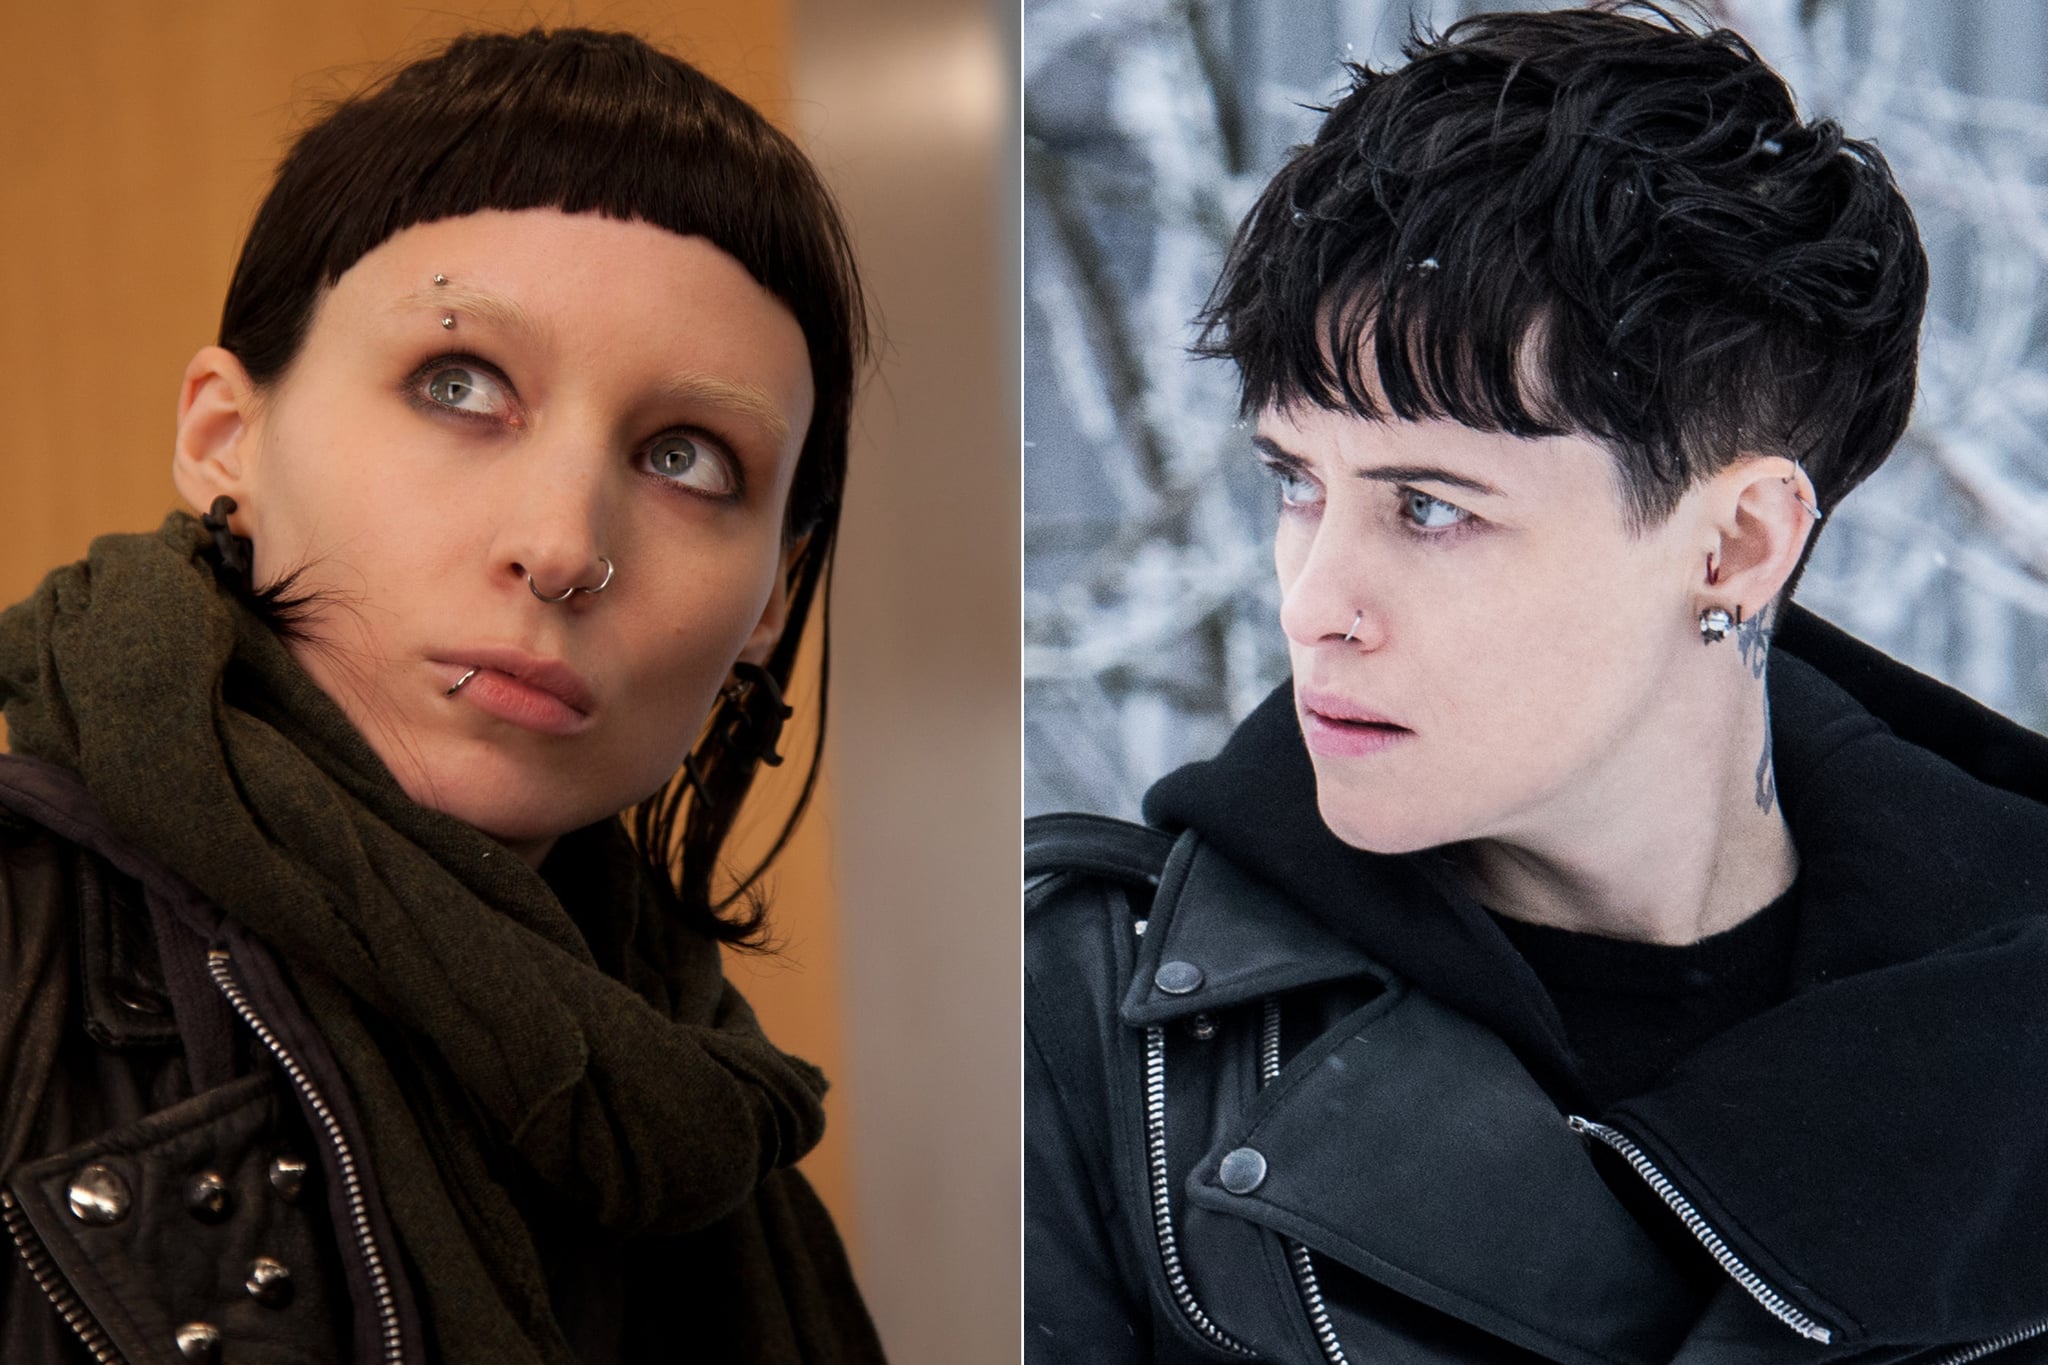 Rooney Mara and Daniel Craig replaced by Claire Foy and Sverrir Gudnason